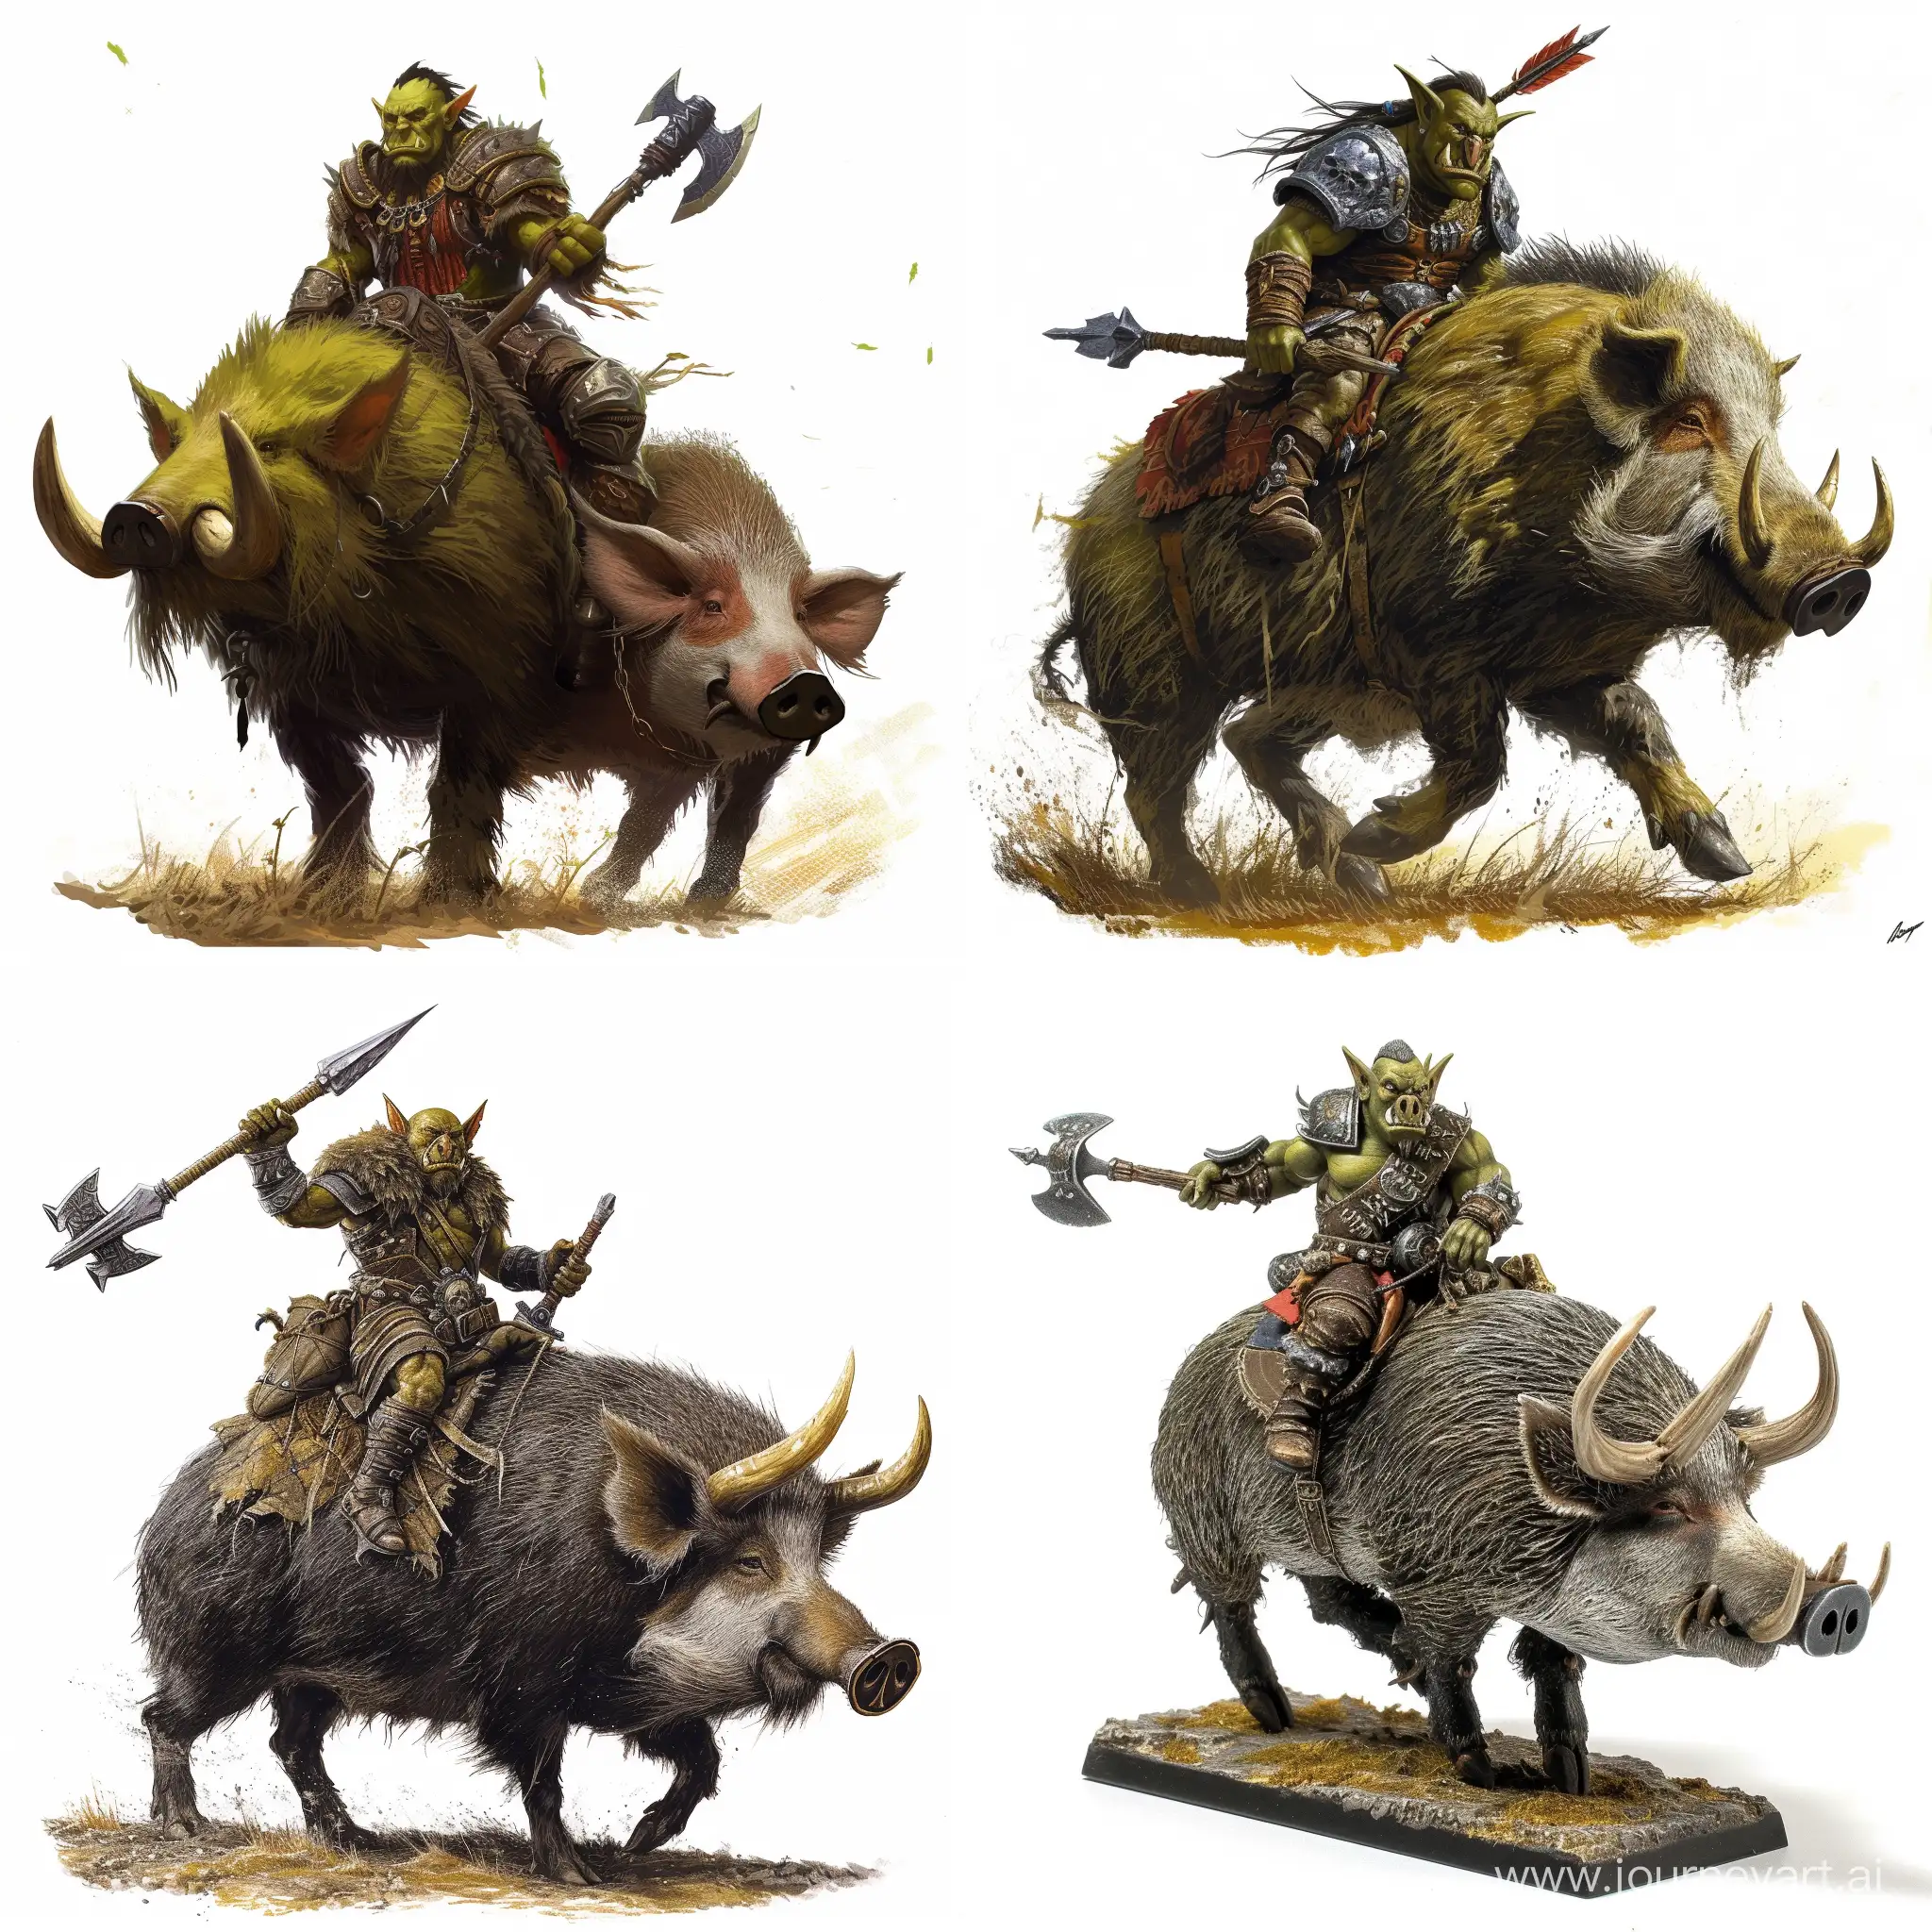 Fierce-Orc-Rider-on-Wild-Boar-Against-White-Background